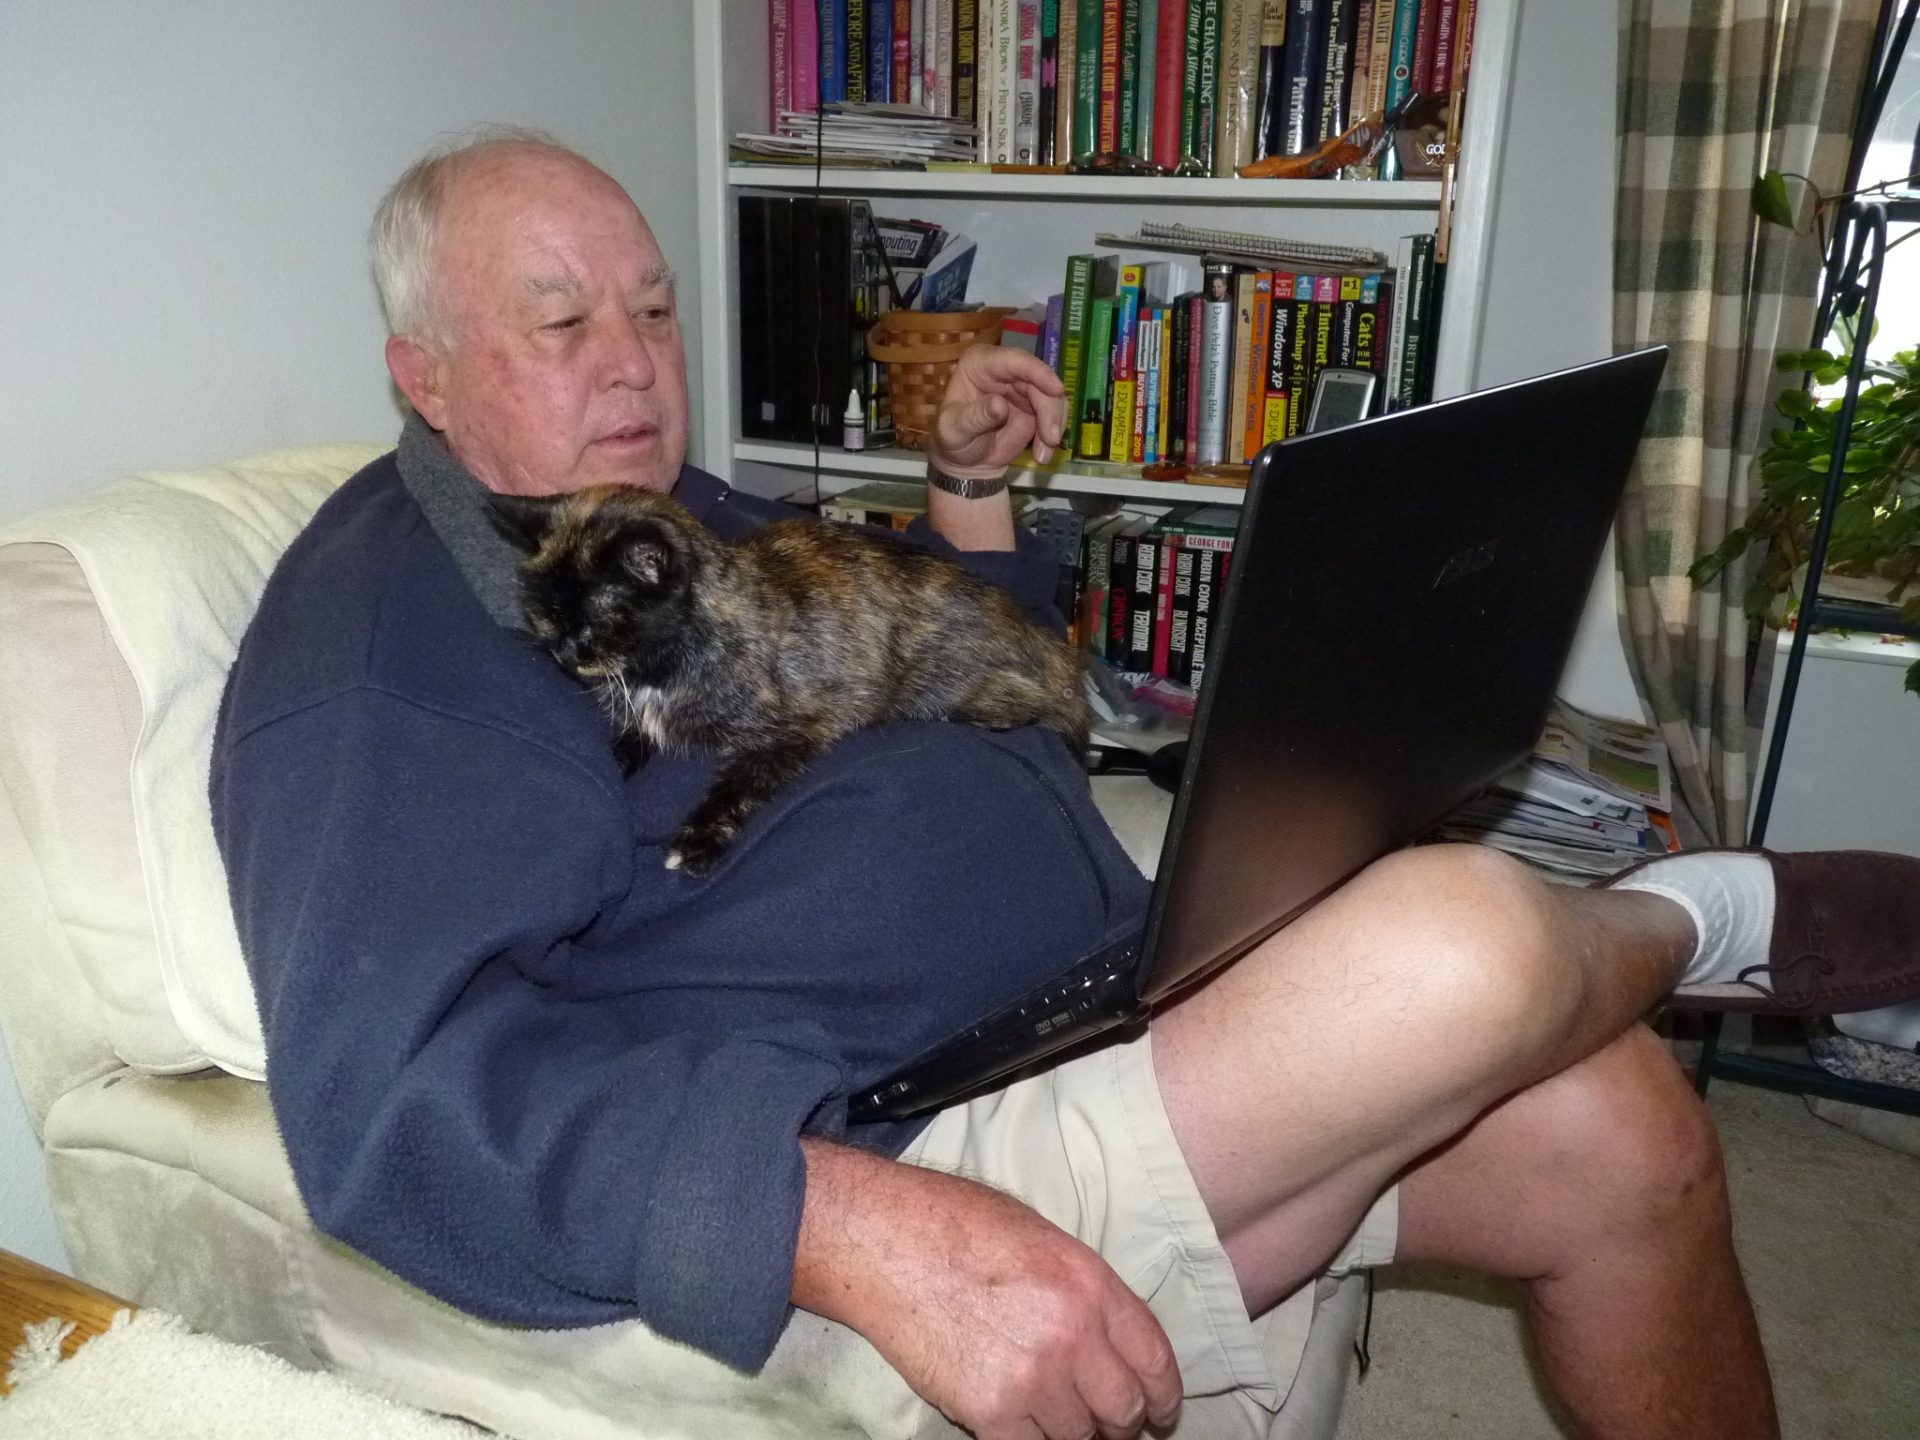 A comfortable chair, a cat, and his computer.  Let Art's day begin.